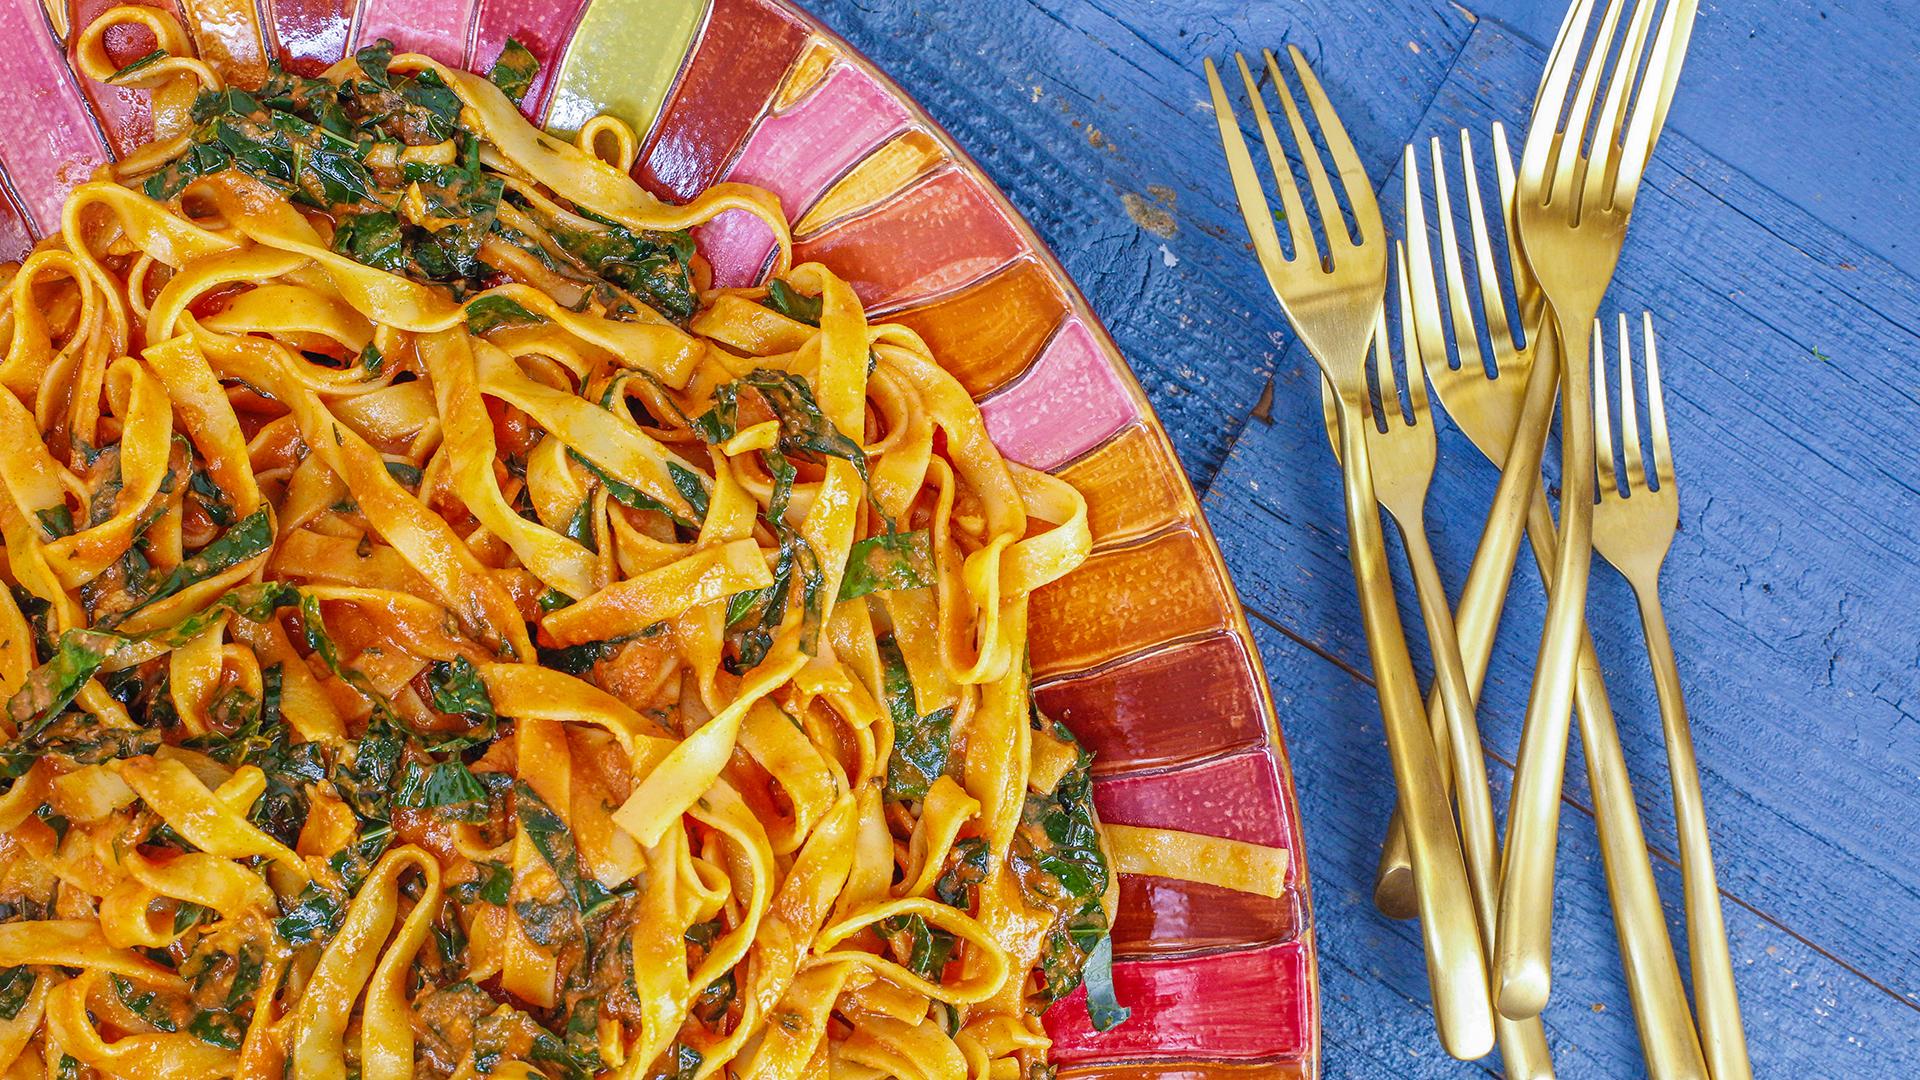 Rachael's Pasta With Crushed Garlic, Tomato And Paprika Sauce | Recipe -  Rachael Ray Show